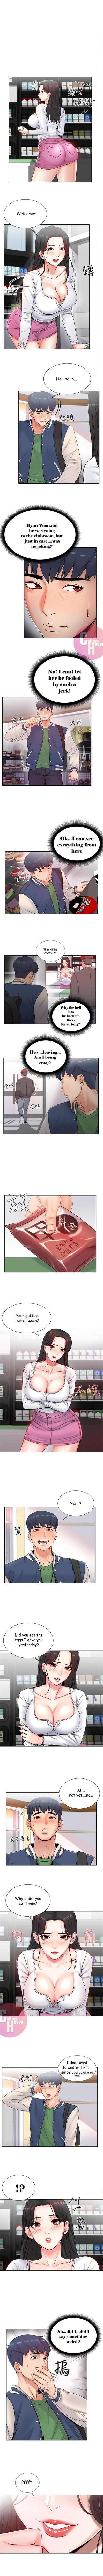 Eunhye’s Supermarket - Chapter 2 Page 6